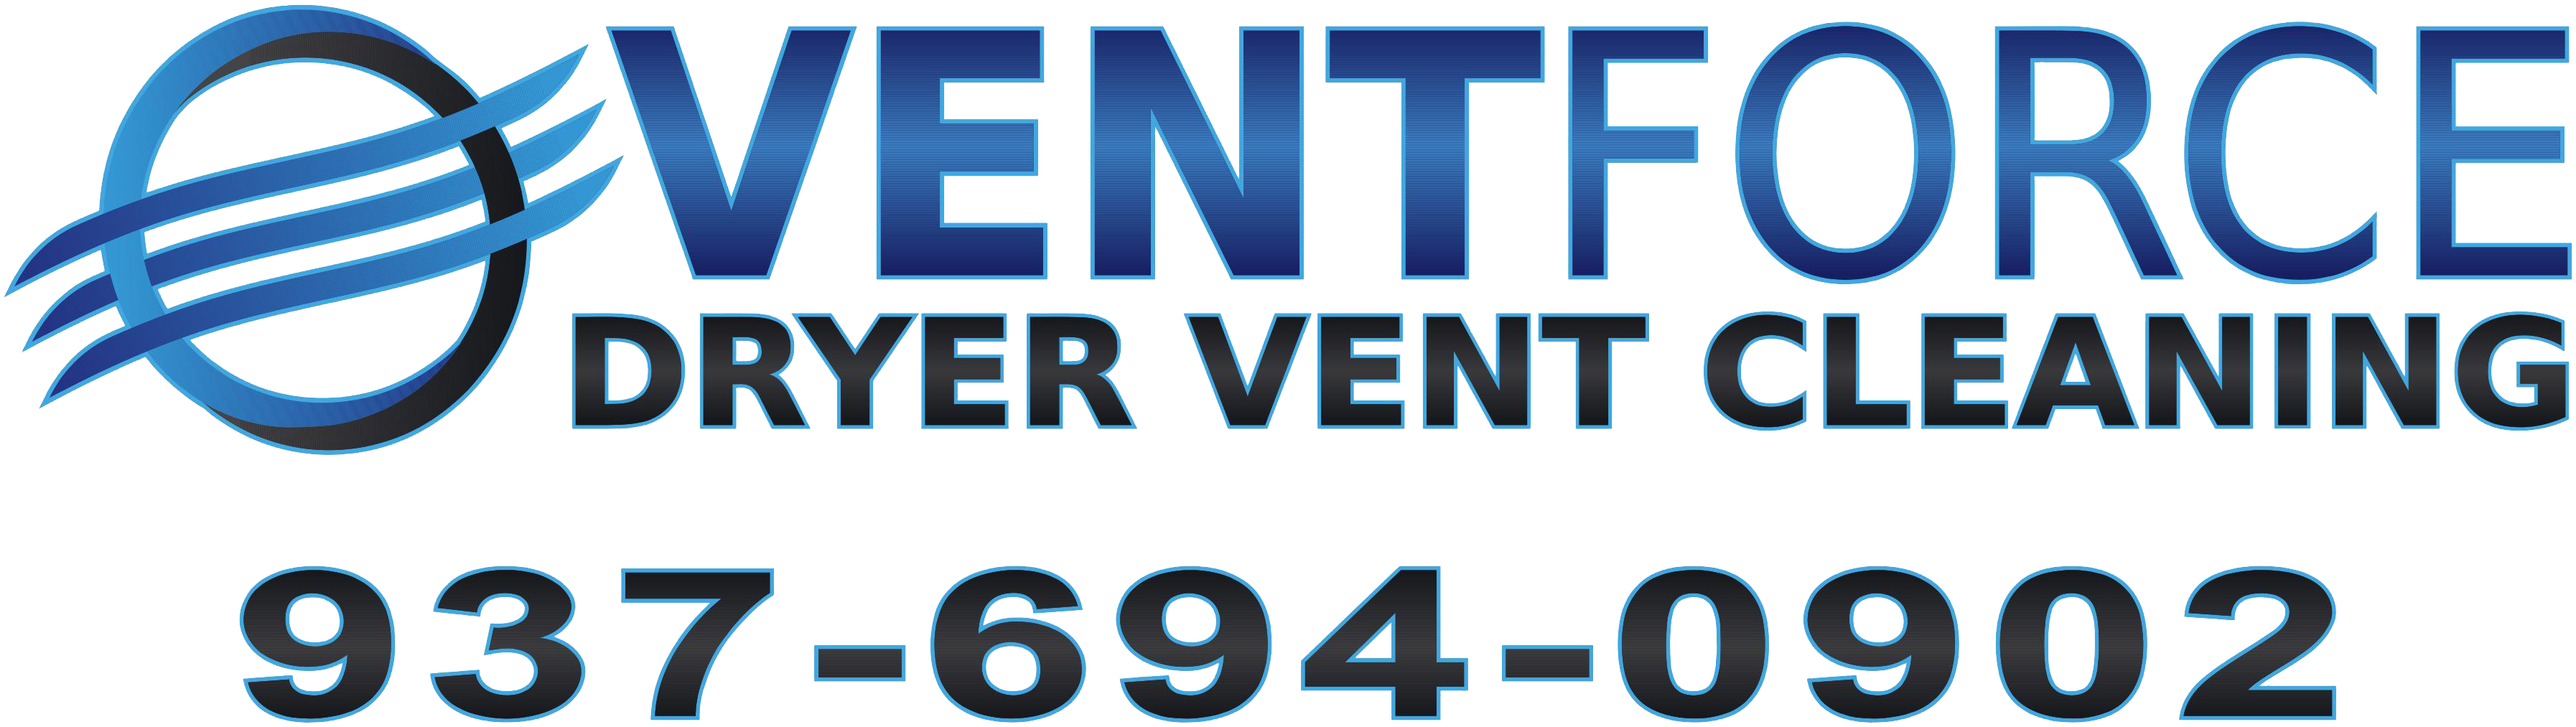 Vent Force Dryer Vent cleaning logo